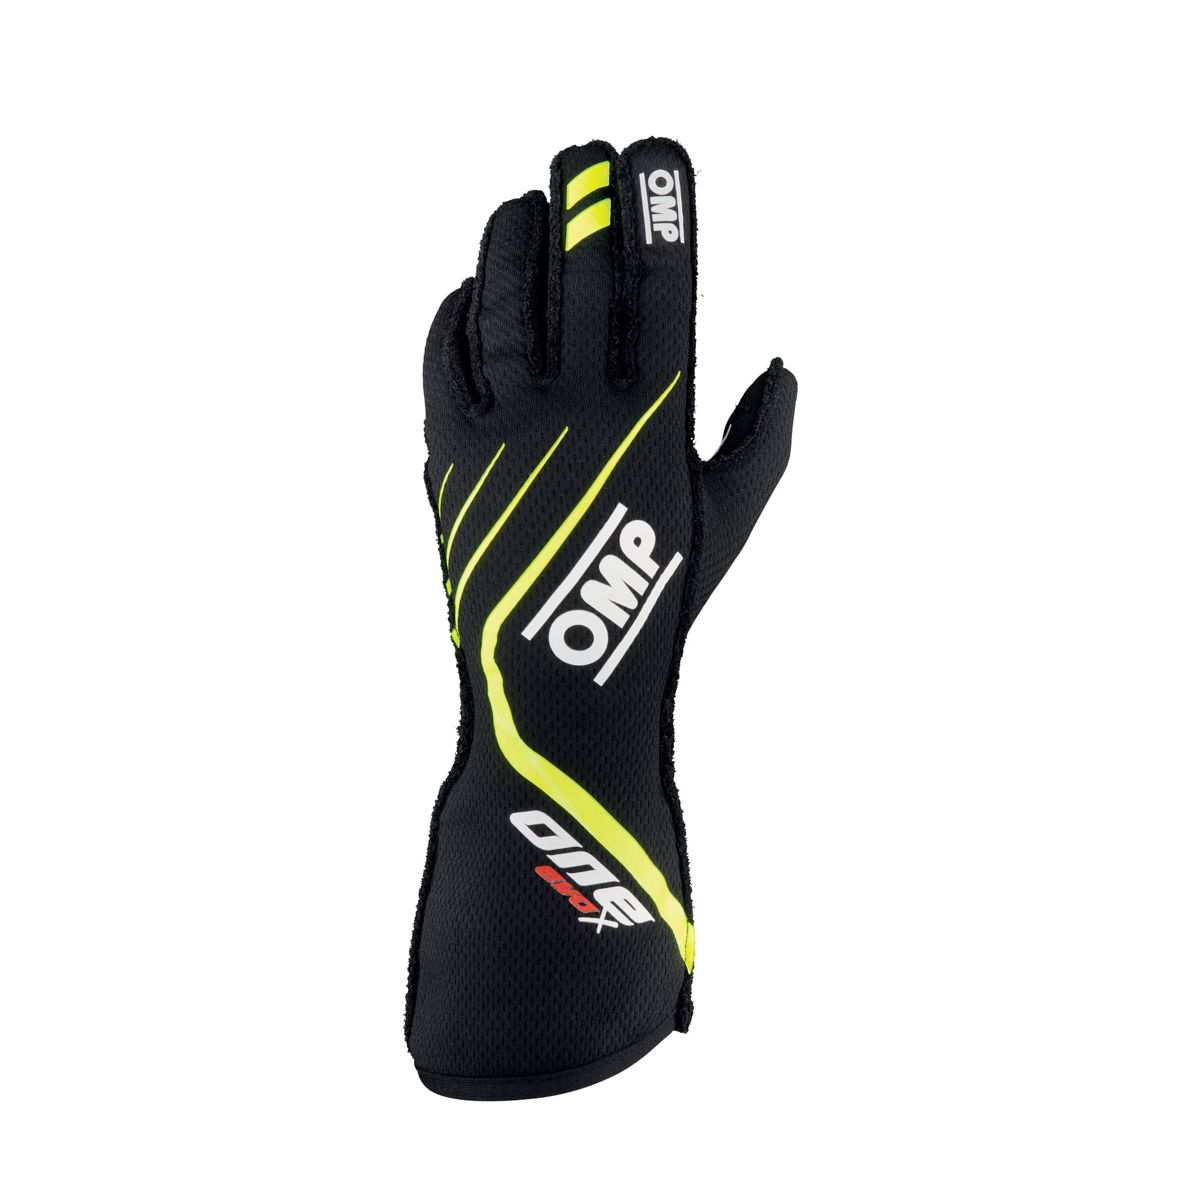 OMP Racing IB771NGIL Driving Gloves, One EVO X, FIA Approved, Double Layer, Fire Retardant Fabric, Black / Fluorescent Yellow, Large, Pair